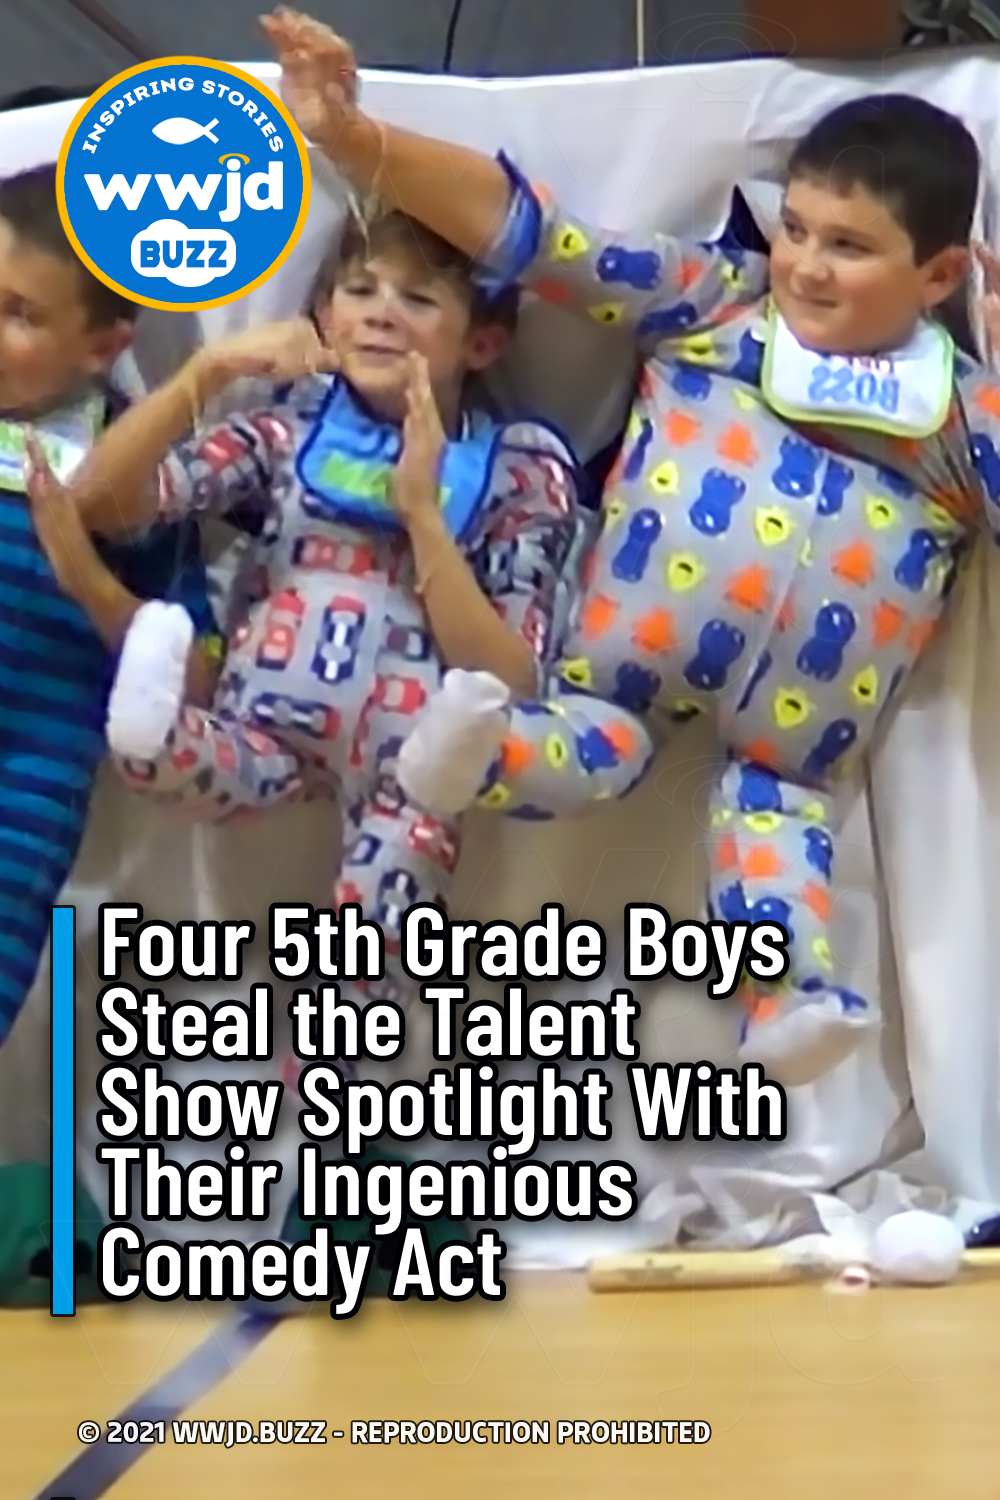 Four 5th Grade Boys Steal the Talent Show Spotlight With Their Ingenious Comedy Act